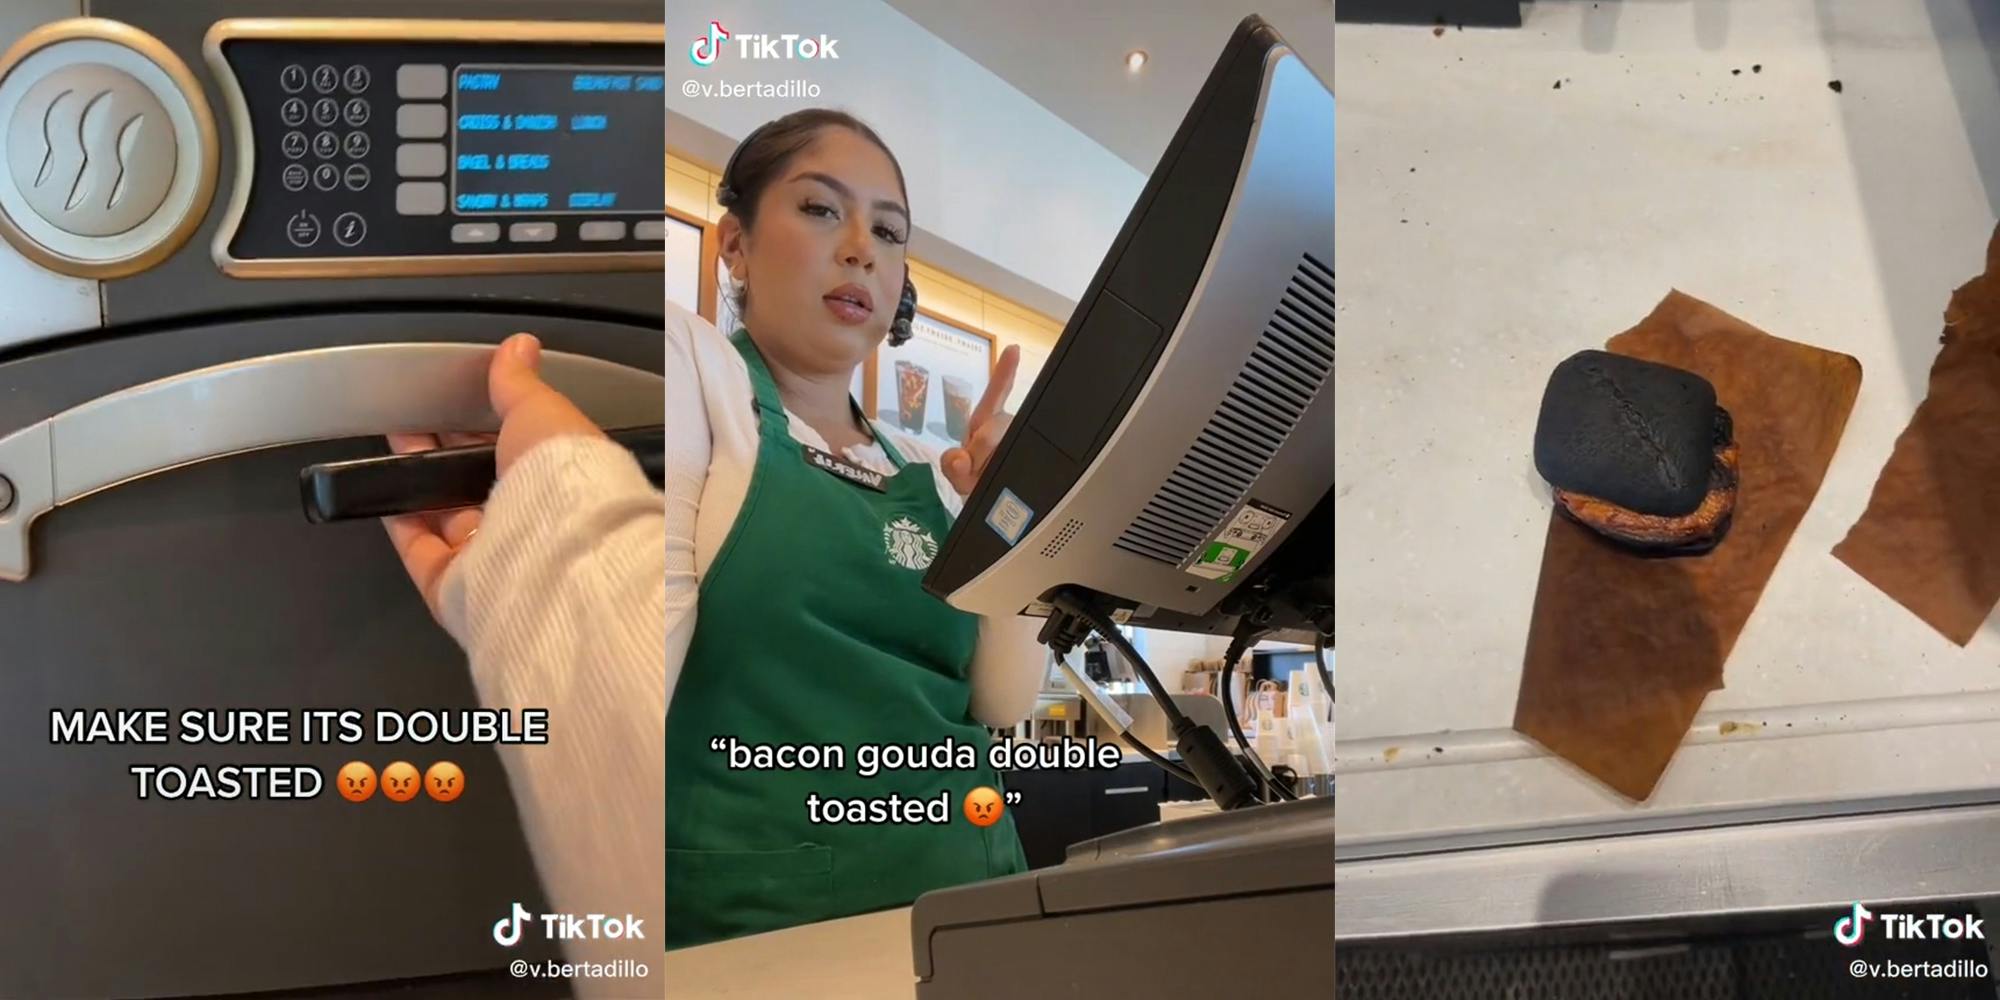 hand operating oven with caption "make sure its double toasted" (l) young woman in starbuck uniform with caption "bacon gouda double toasted" (c) burnt sandwich on counter (r)